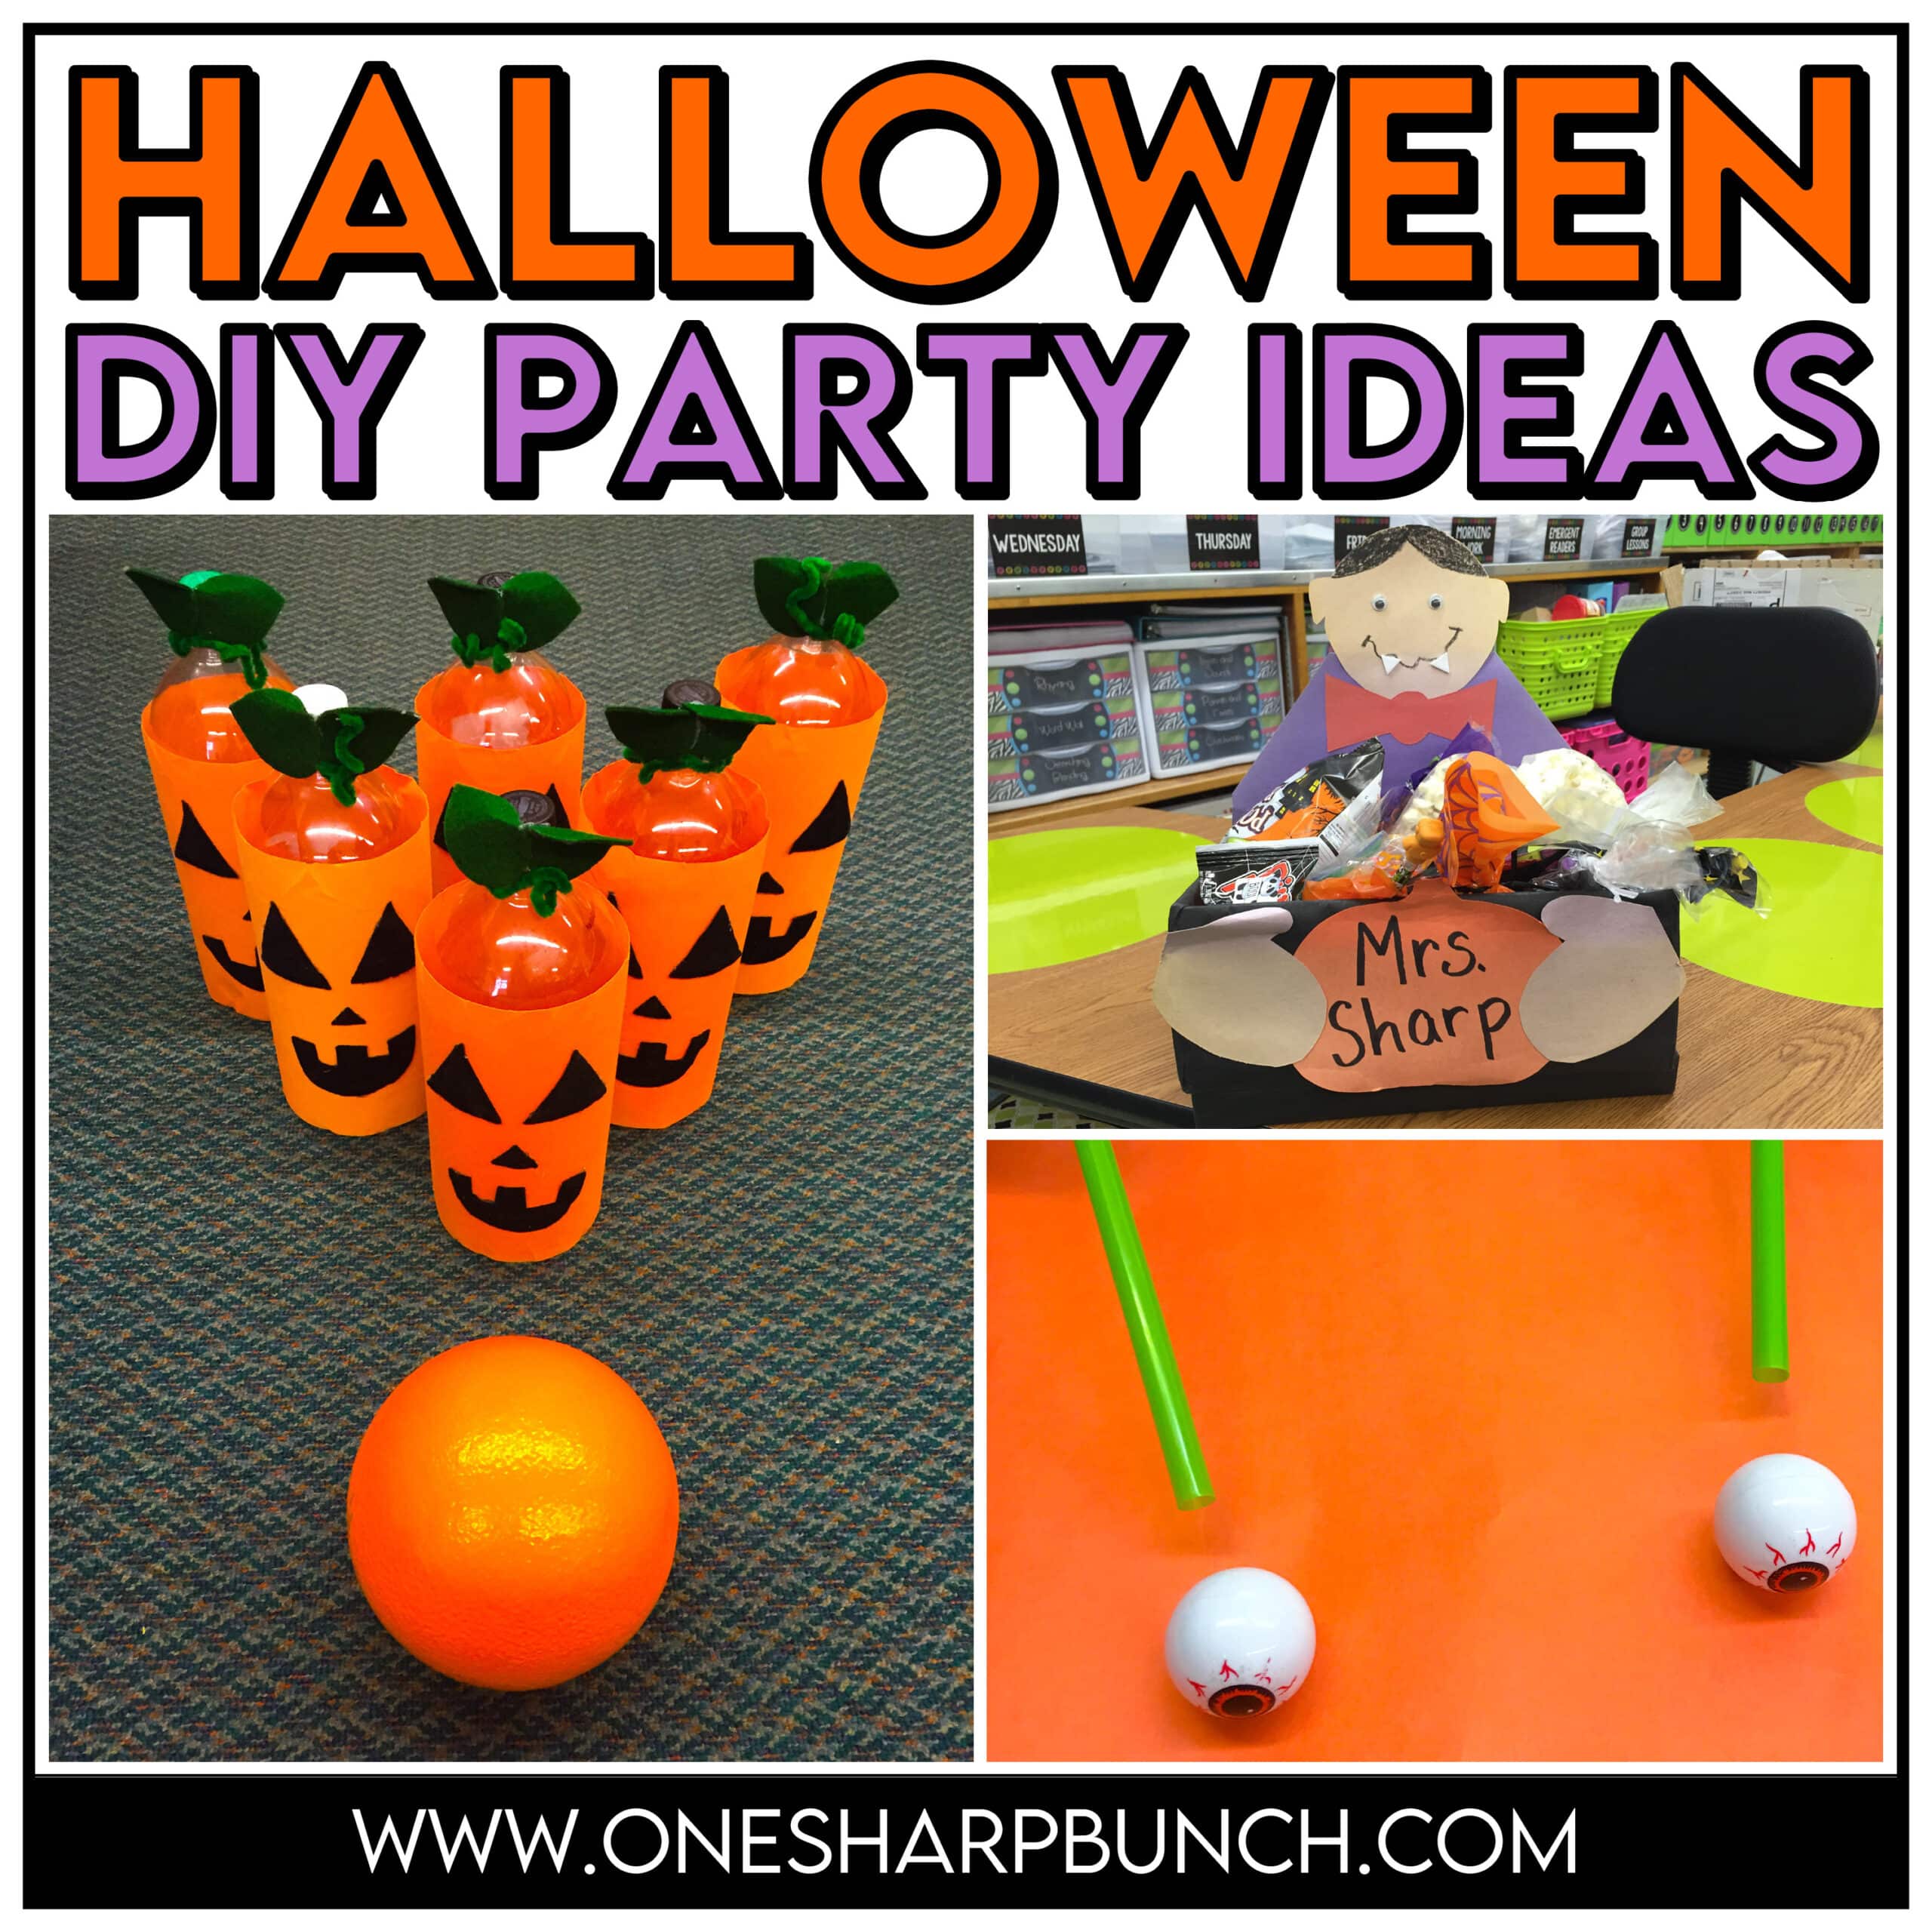 Simple DIY Halloween party ideas for the classroom, including Halloween games, Halloween crafts and Halloween food ideas! Whether you are a seasoned teacher, first year teacher or seasoned room mom, keep your little goblins engaged and your classroom Halloween party well-managed! Don’t forget to check out the vampire Halloween candy boxes, the perfect Halloween treat bag for all of your Halloween treats!